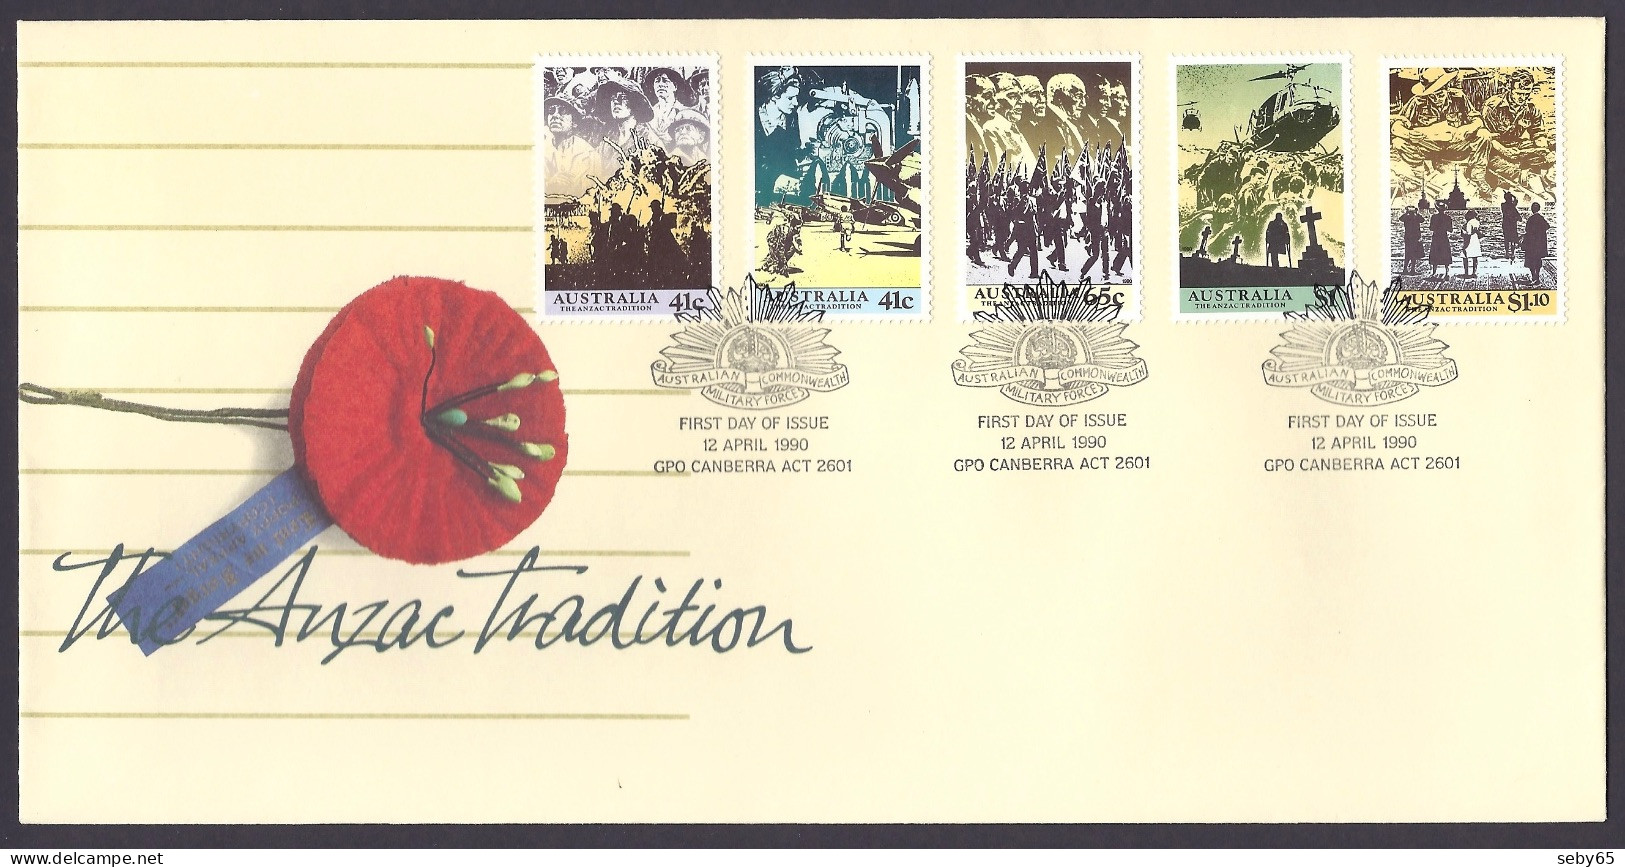 Australia 1990 - The Anzac Tradition, War, Troops, Landing, Army, Military - FDC - Ersttagsbelege (FDC)